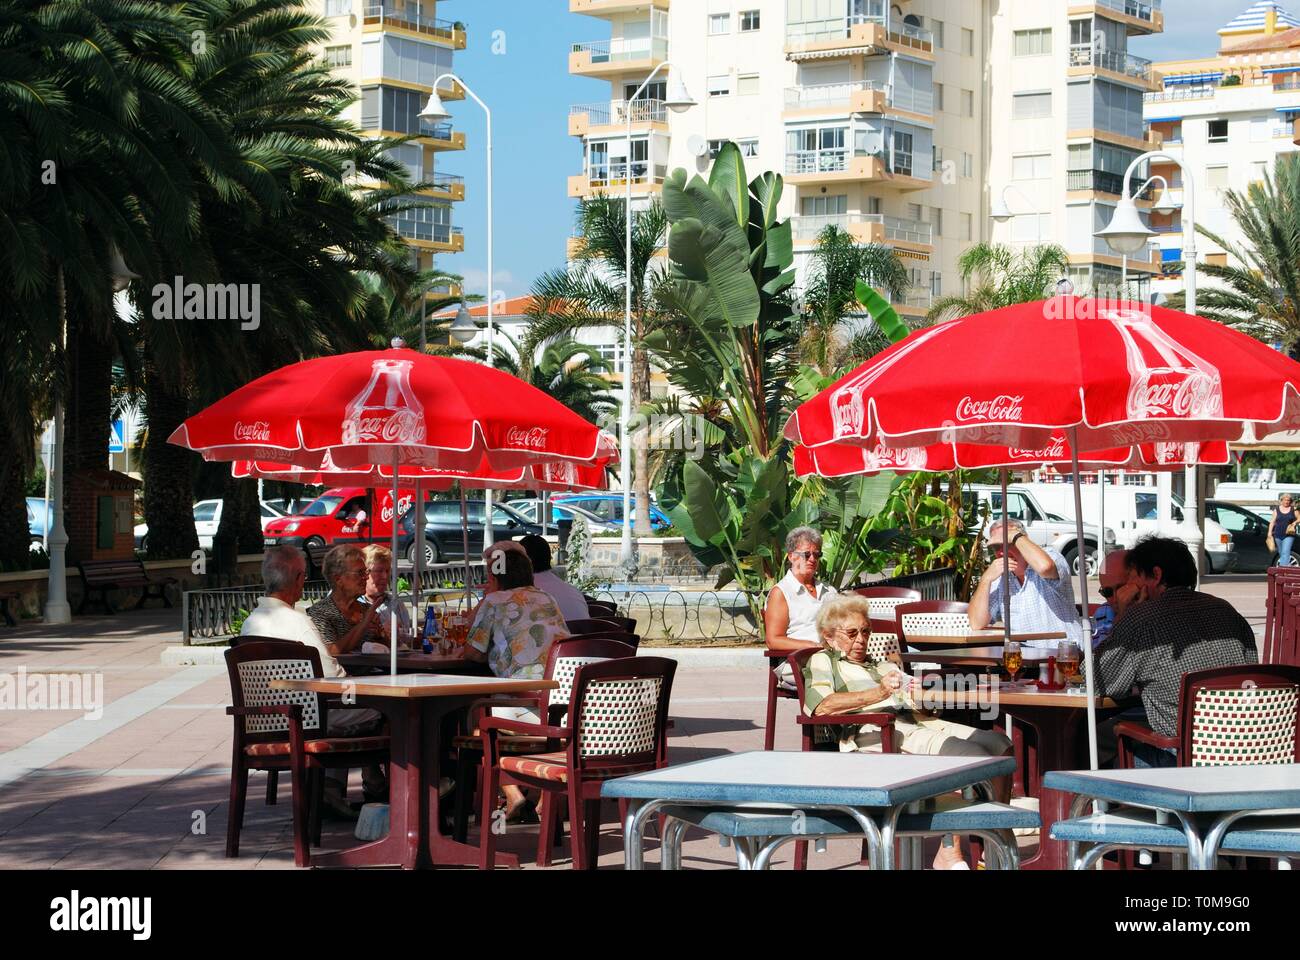 Tourists relaxing at a pavement cafe with red parasols, Lagos, Malaga Province, Andalusia, Spain, Western Europe. Stock Photo